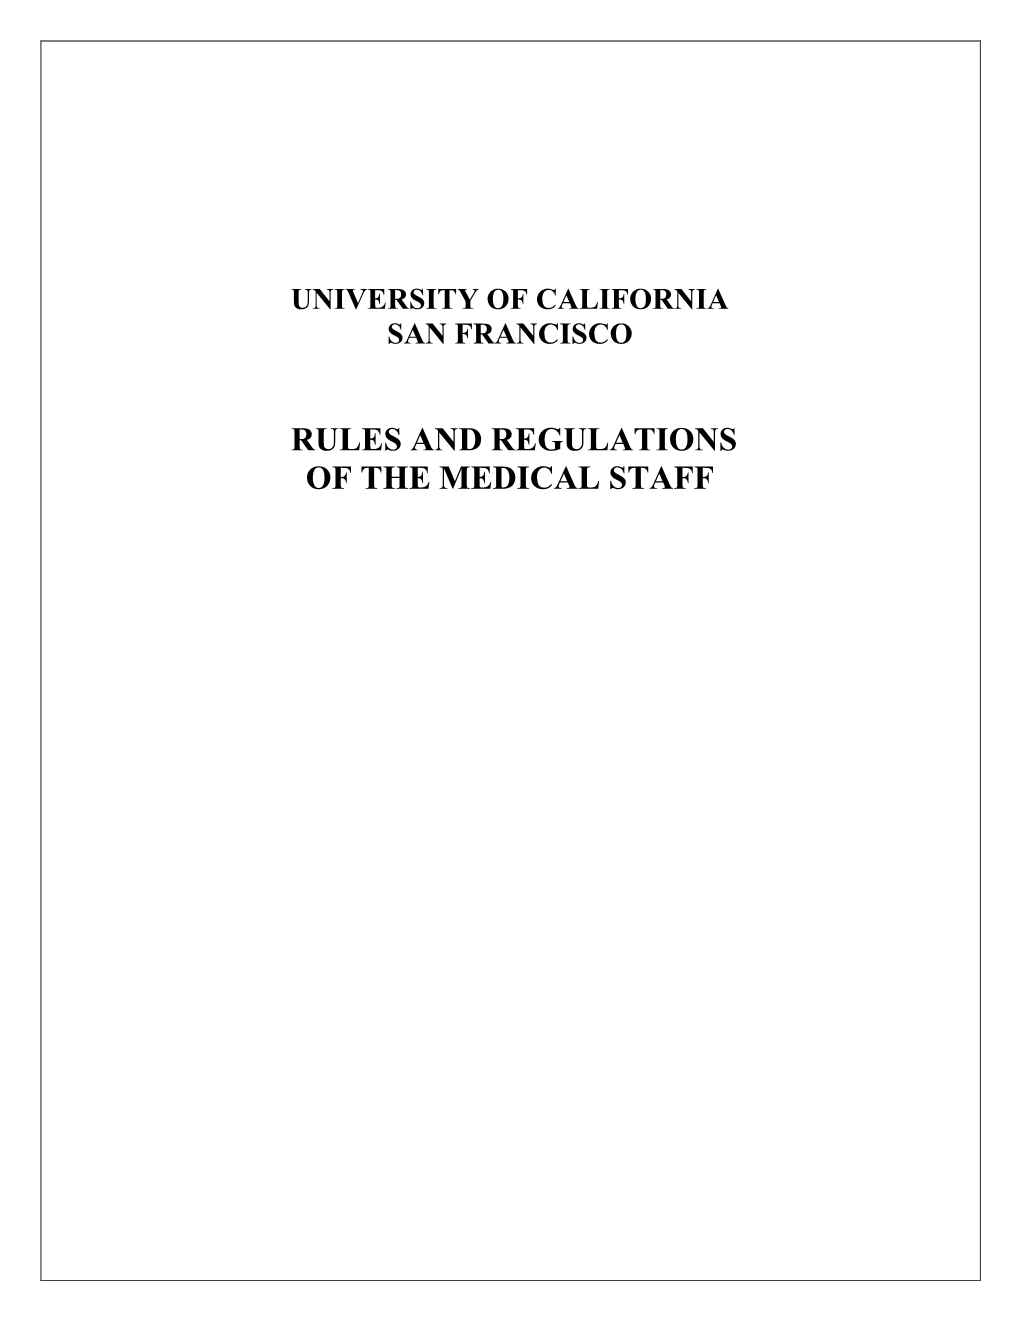 Rules and Regulations of the Medical Staff